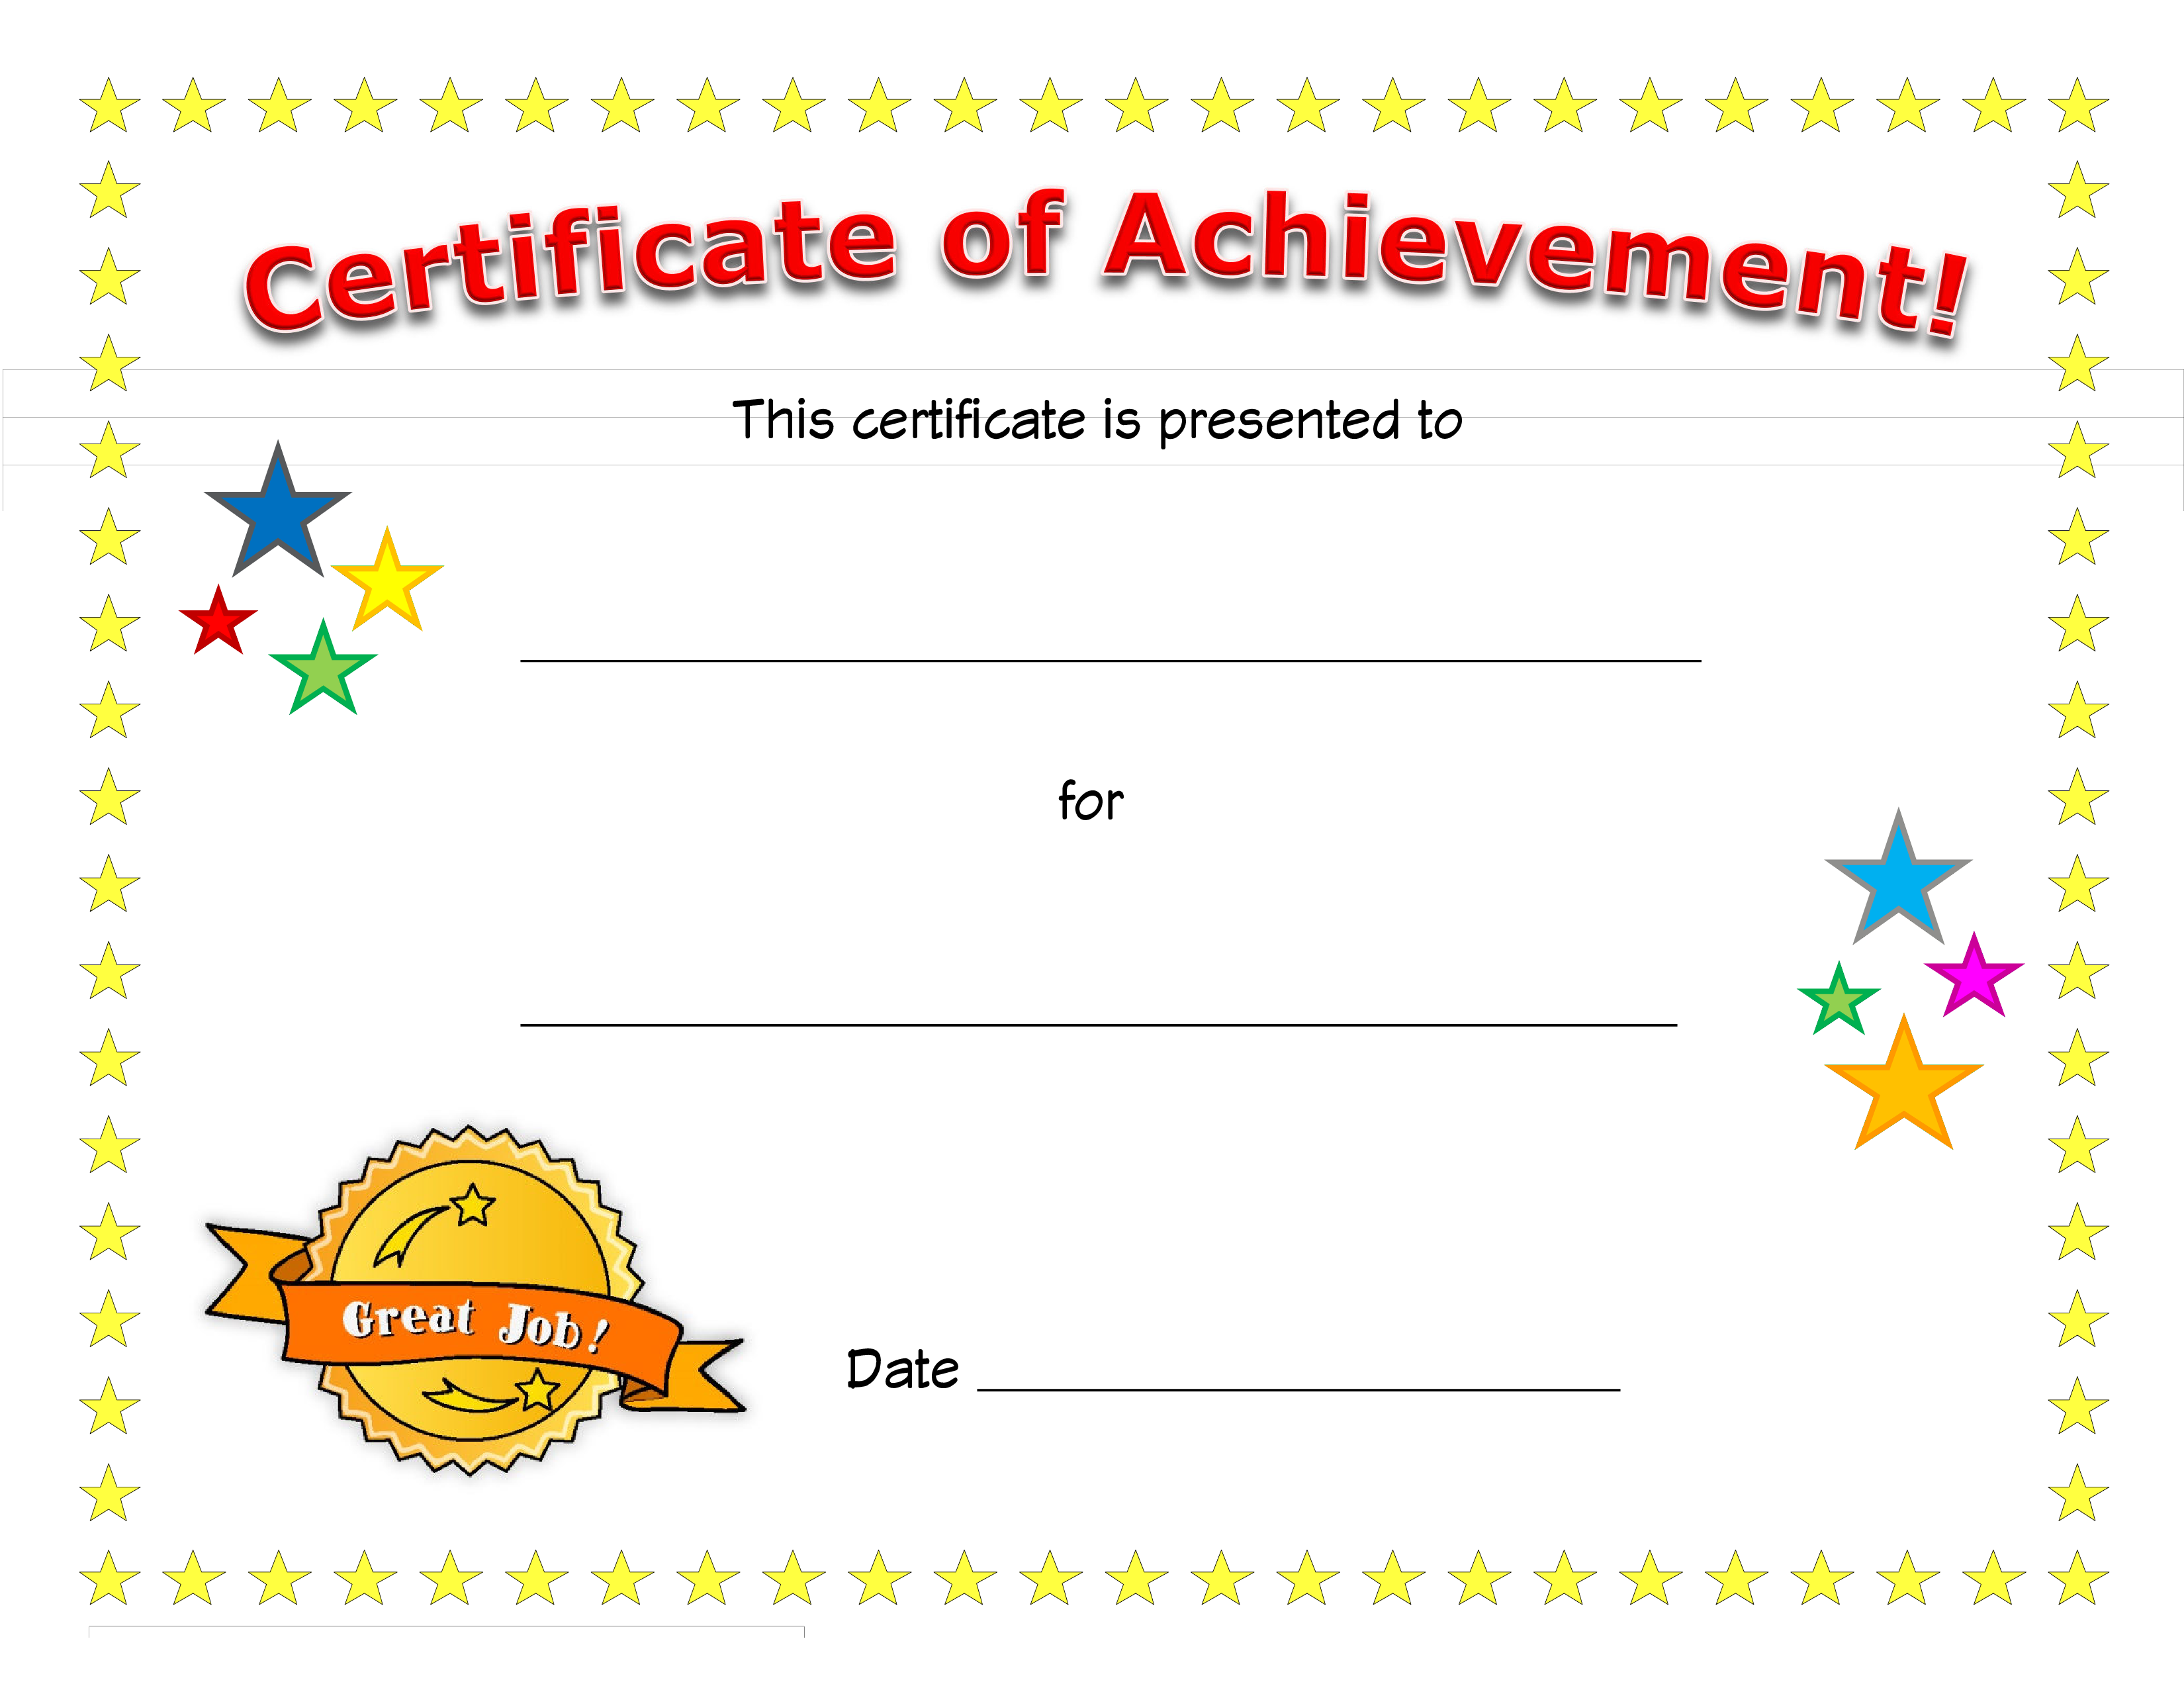 Blank Certificate Of Achievement Templates At Allbusinesstemplates